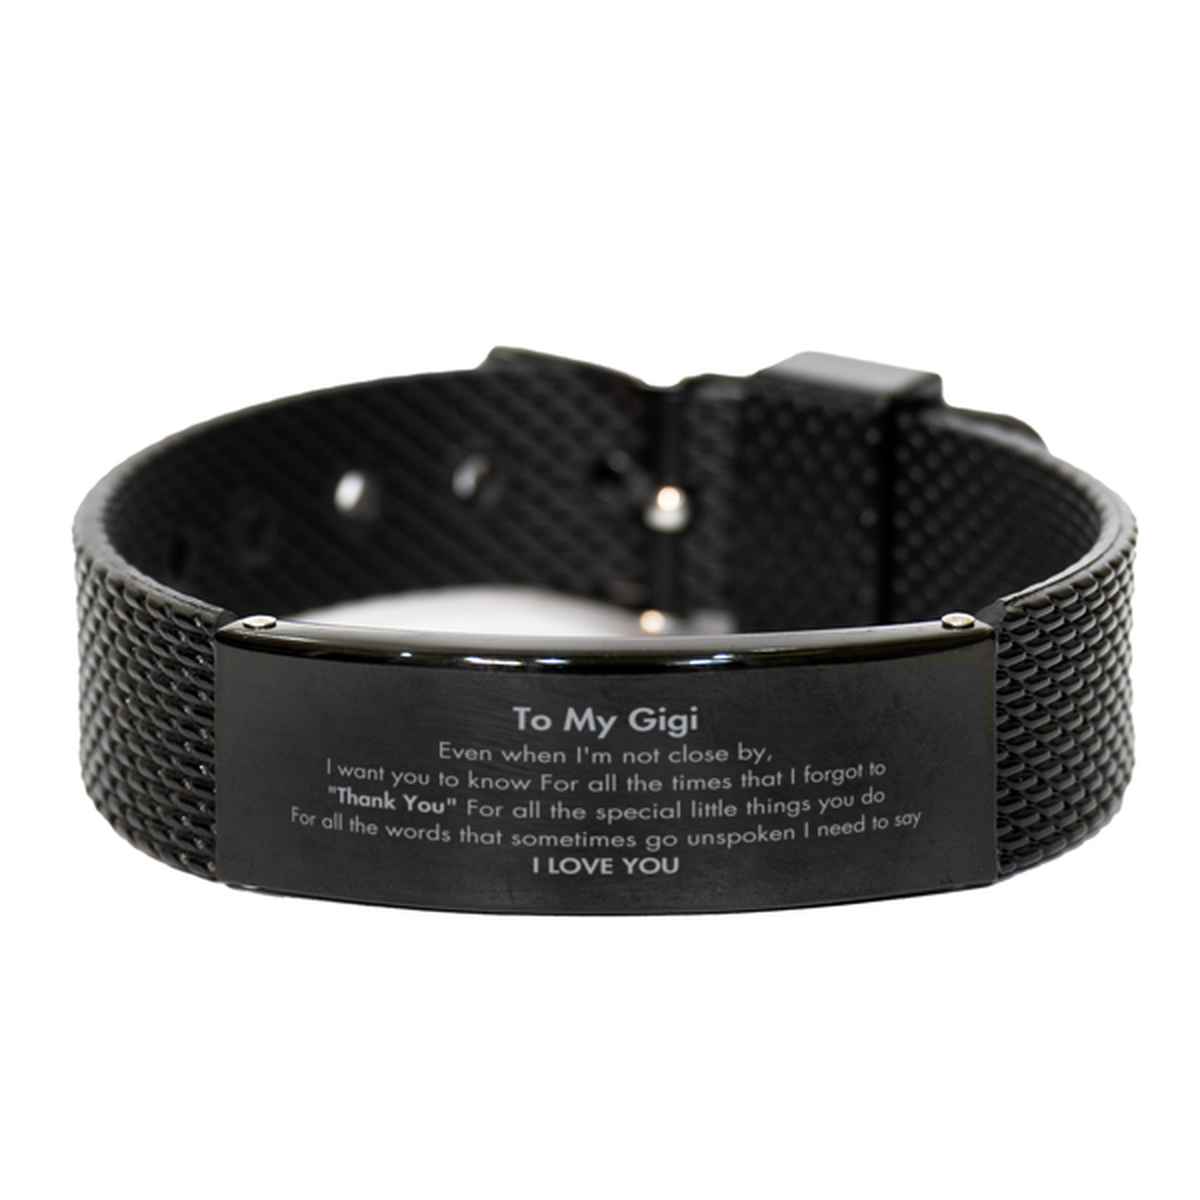 Thank You Gifts for Gigi, Keepsake Black Shark Mesh Bracelet Gifts for Gigi Birthday Mother's day Father's Day Gigi For all the words That sometimes go unspoken I need to say I LOVE YOU